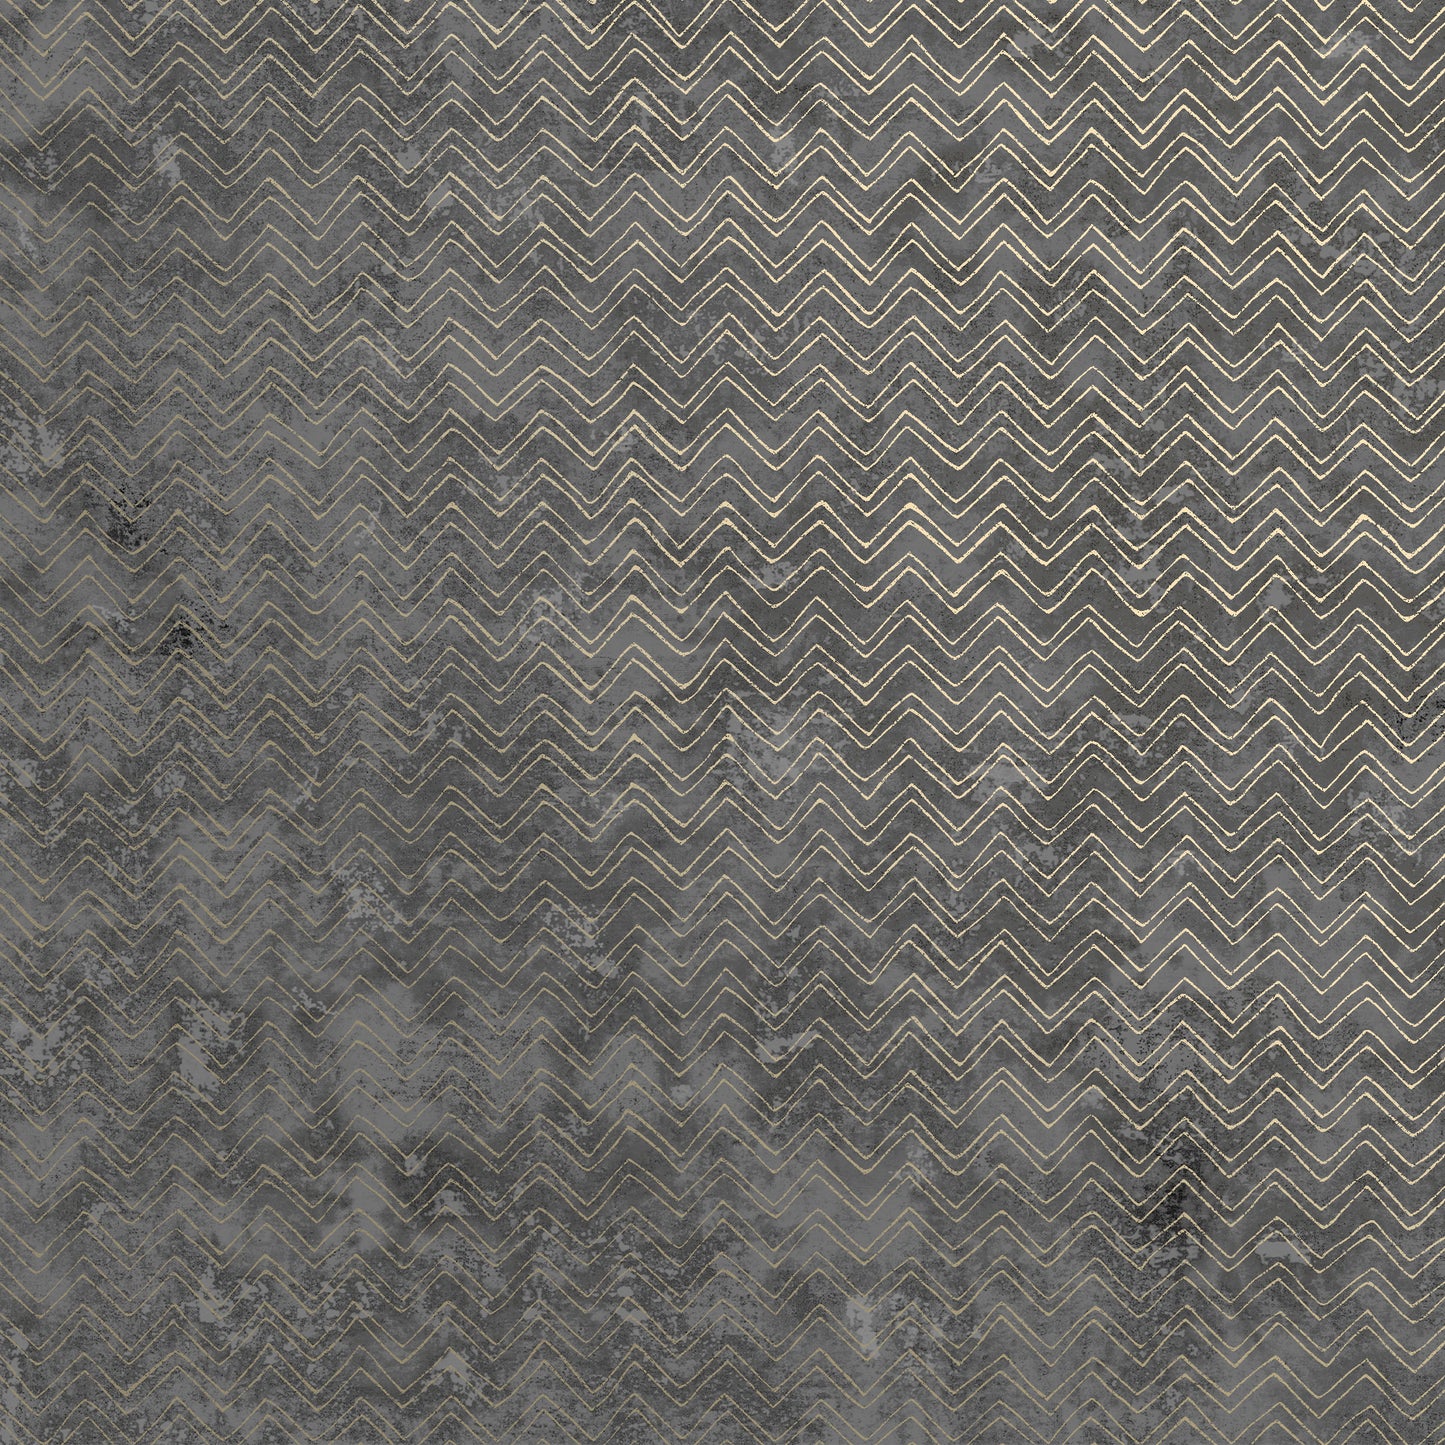 Save 2927-00601 Polished Luna Charcoal Distressed Chevron Charcoal Brewster Wallpaper